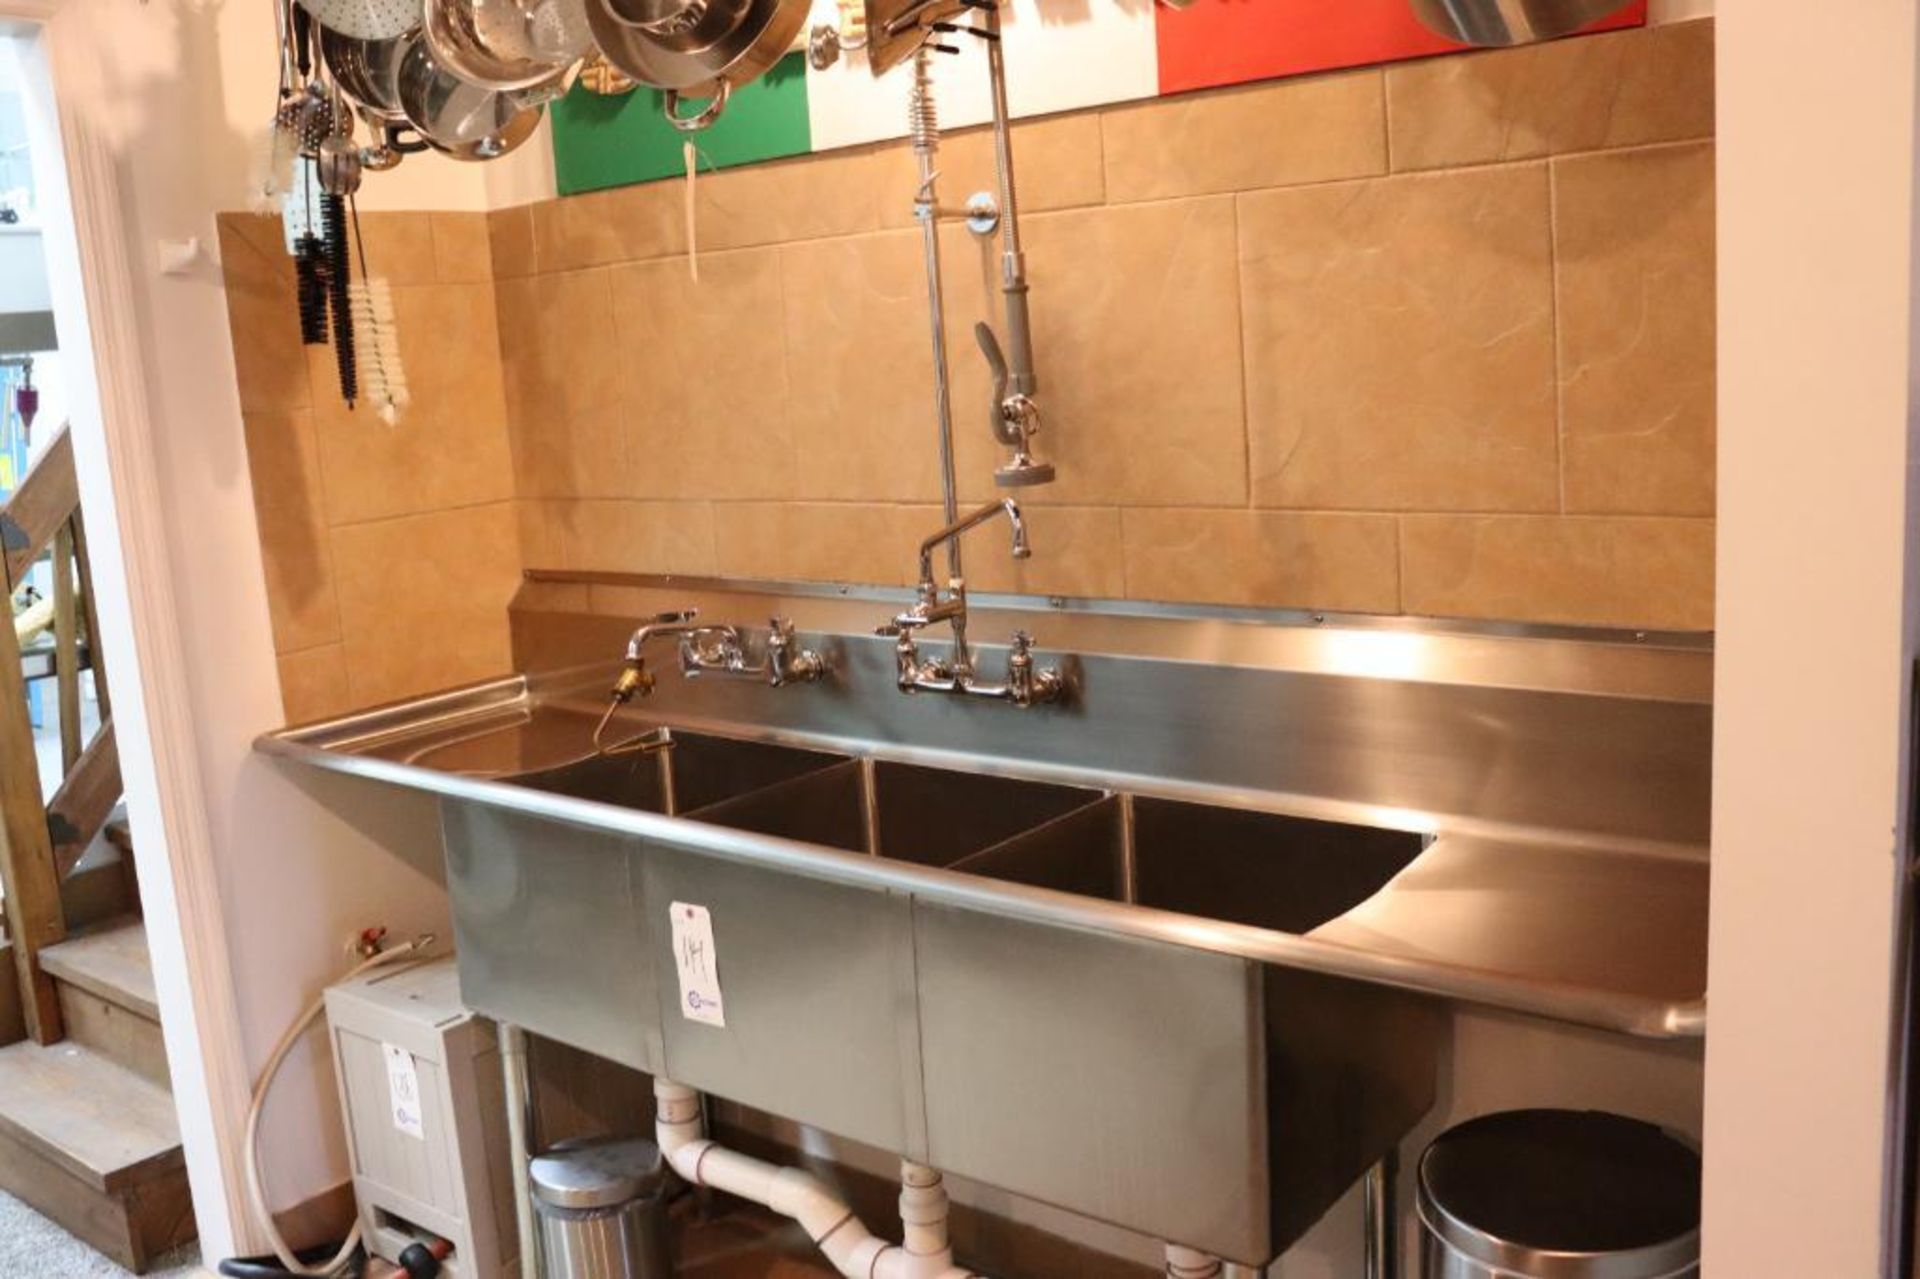 3 compartment commercial sink - Image 2 of 10